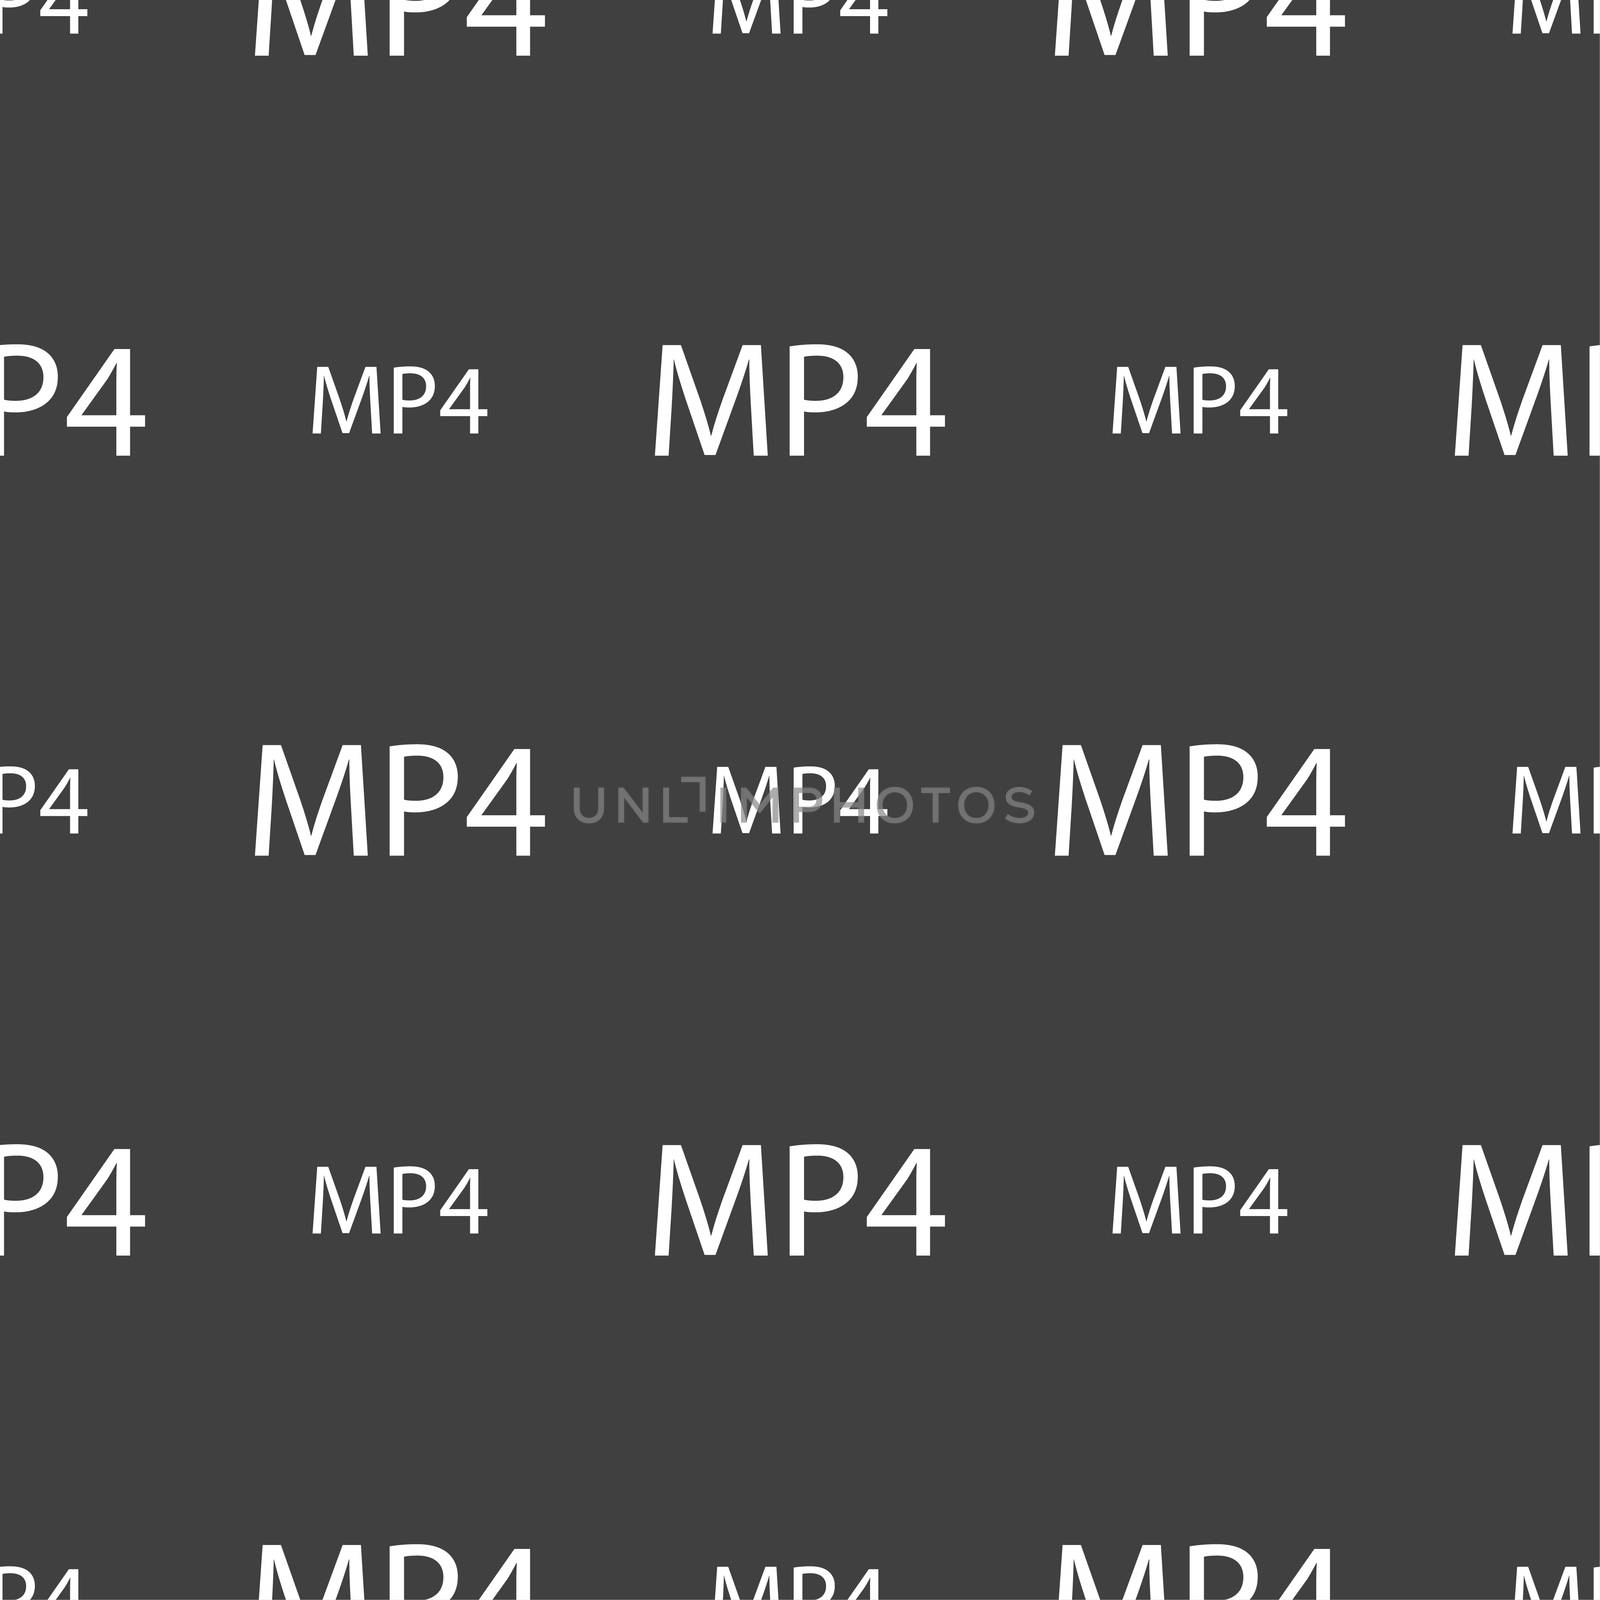 Mpeg4 video format sign icon. symbol. Seamless pattern on a gray background. illustration